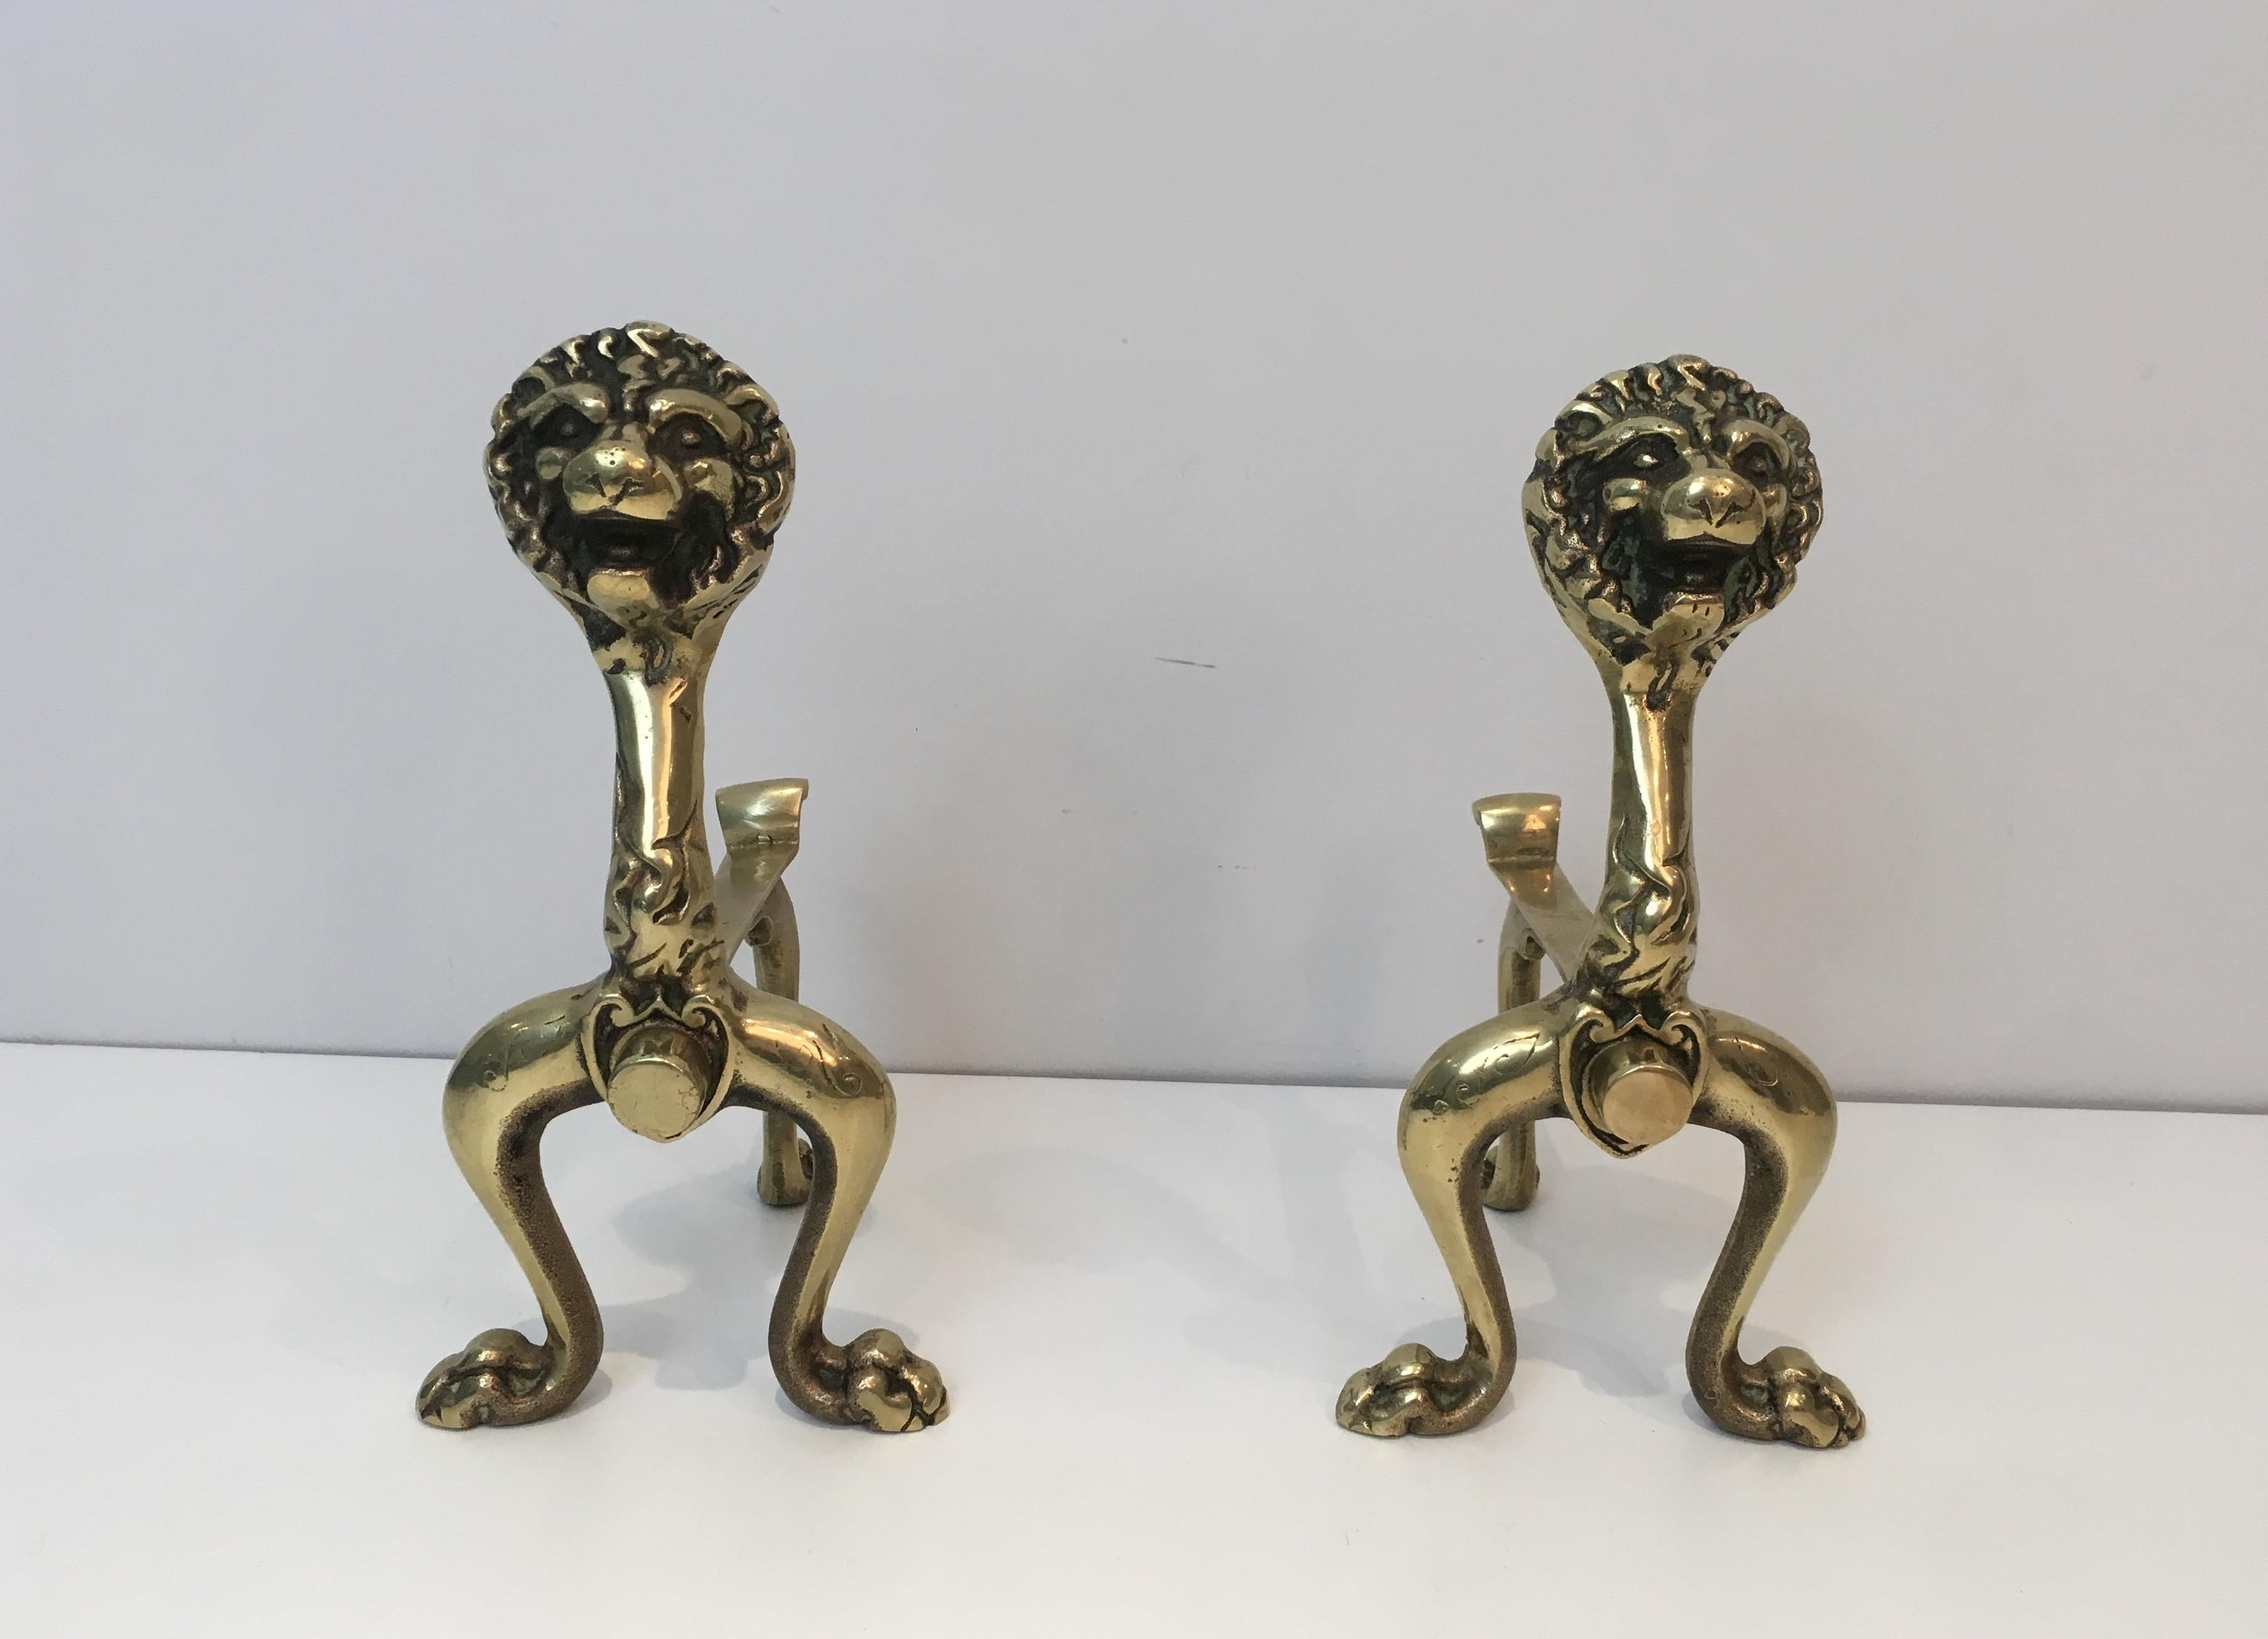 This unusual pair of decorative andirons is made of bronze lions. This is a French work, circa 1900.